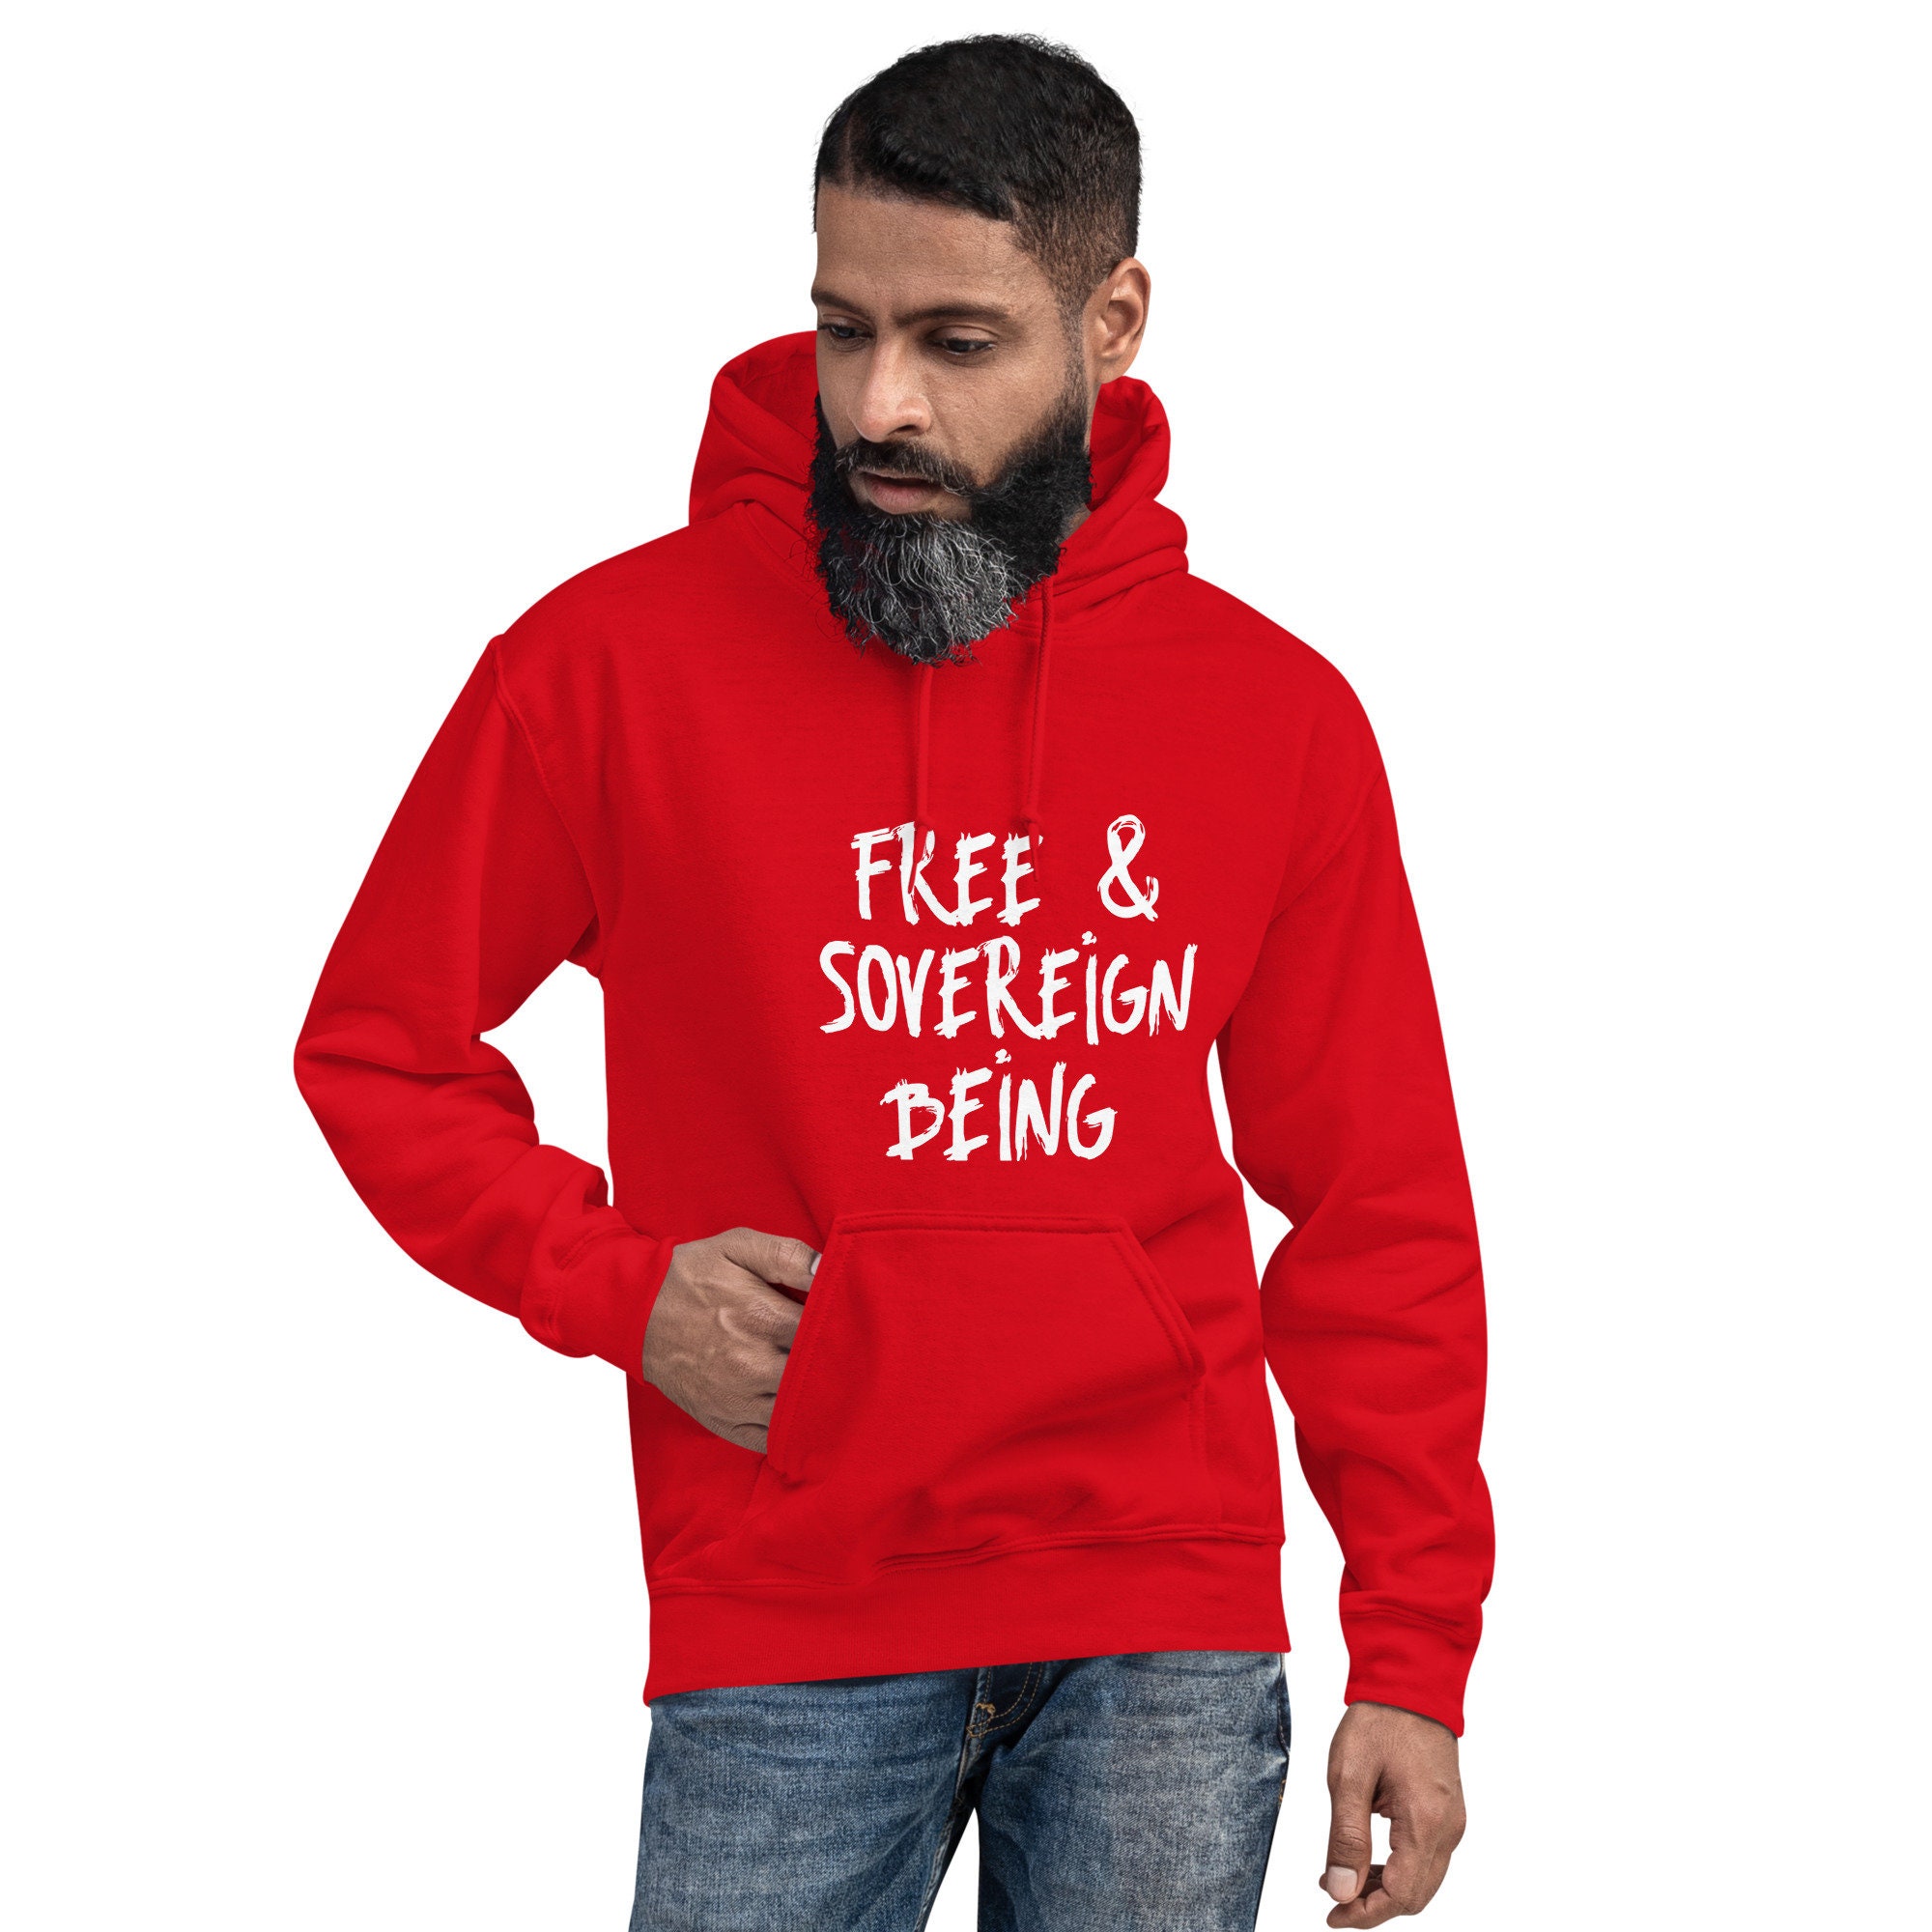 FREE & SOVEREIGN Being Unisex Hoodie Hoody Maroon Navy Black Army Pink Blue Red S M L XL 2XL